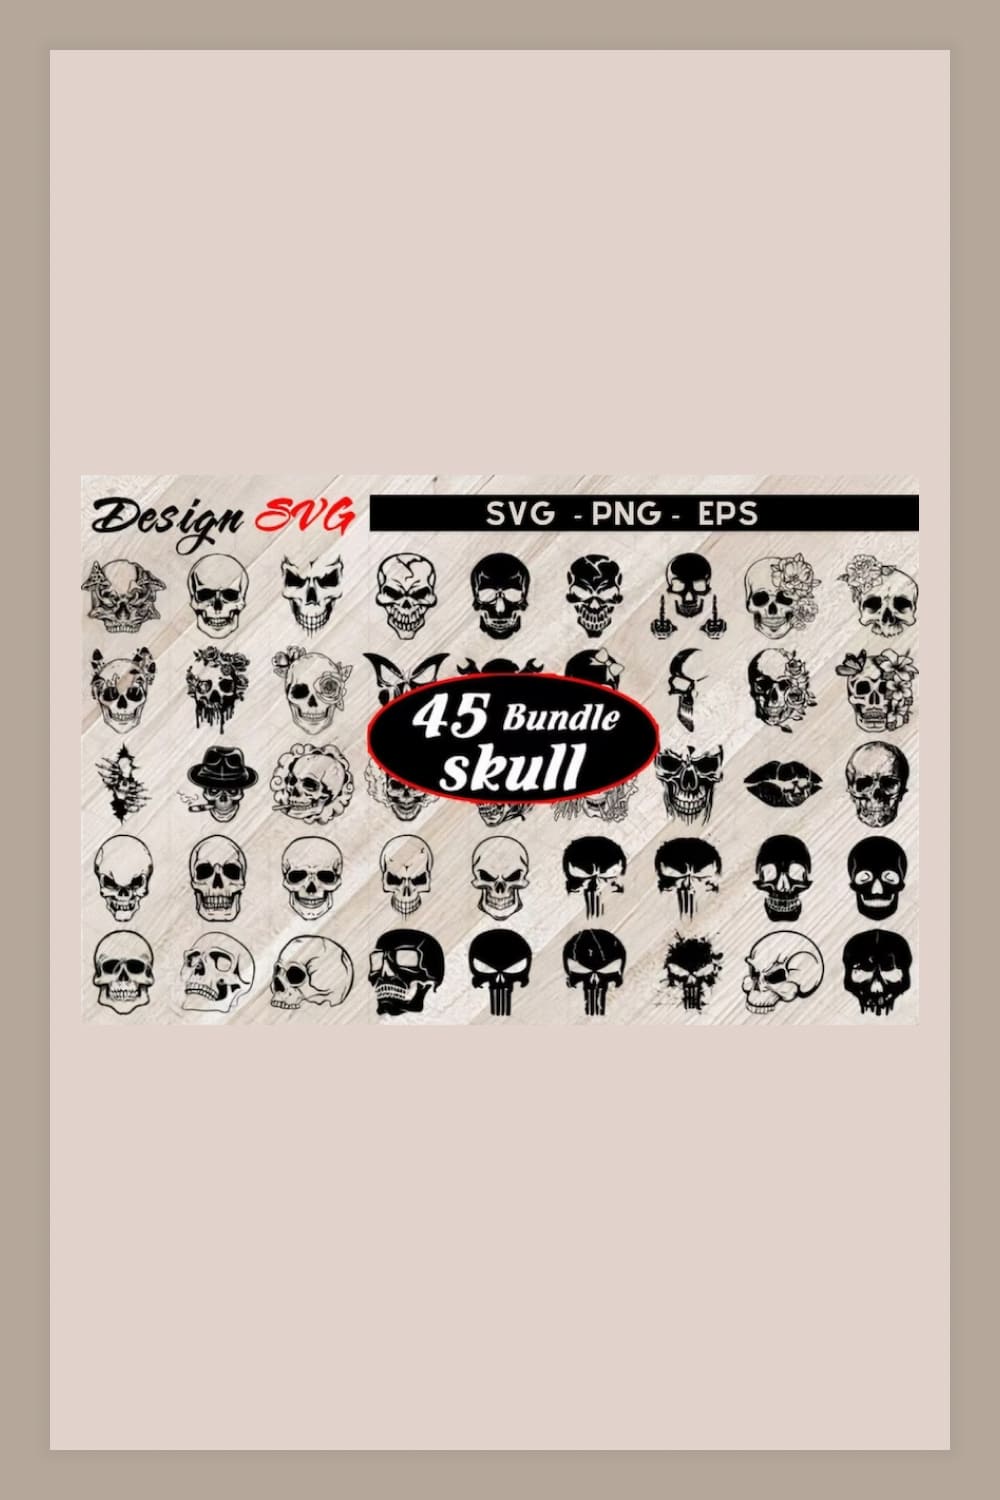 Collage of different variants of images of skulls on a beige background.